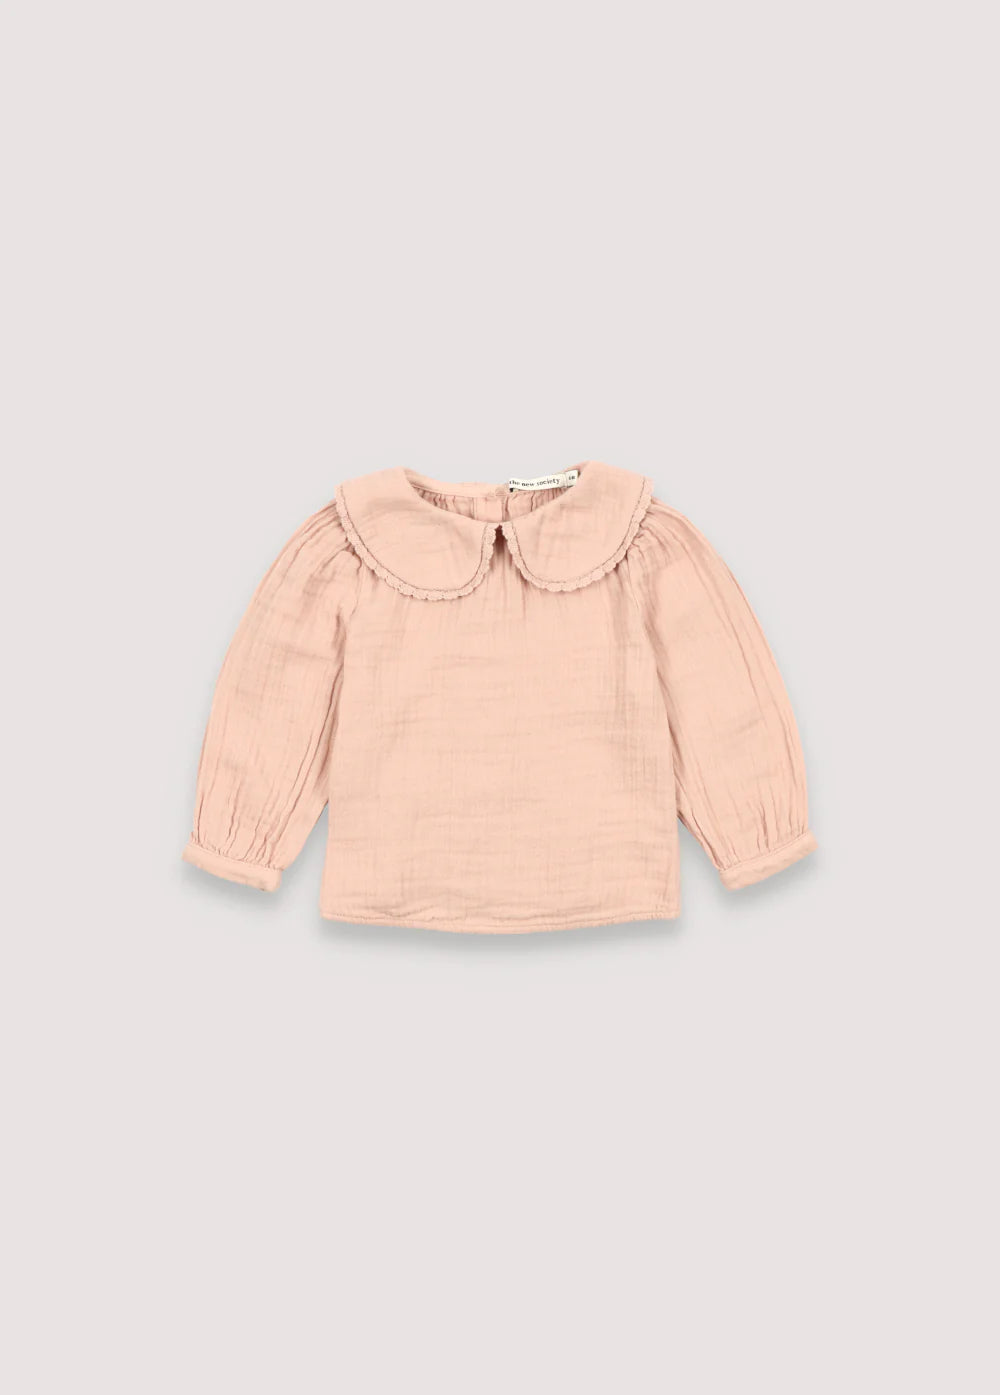 MATILDA BABY BLOUSE - ROSE DUST, THE NEW SOCIETY